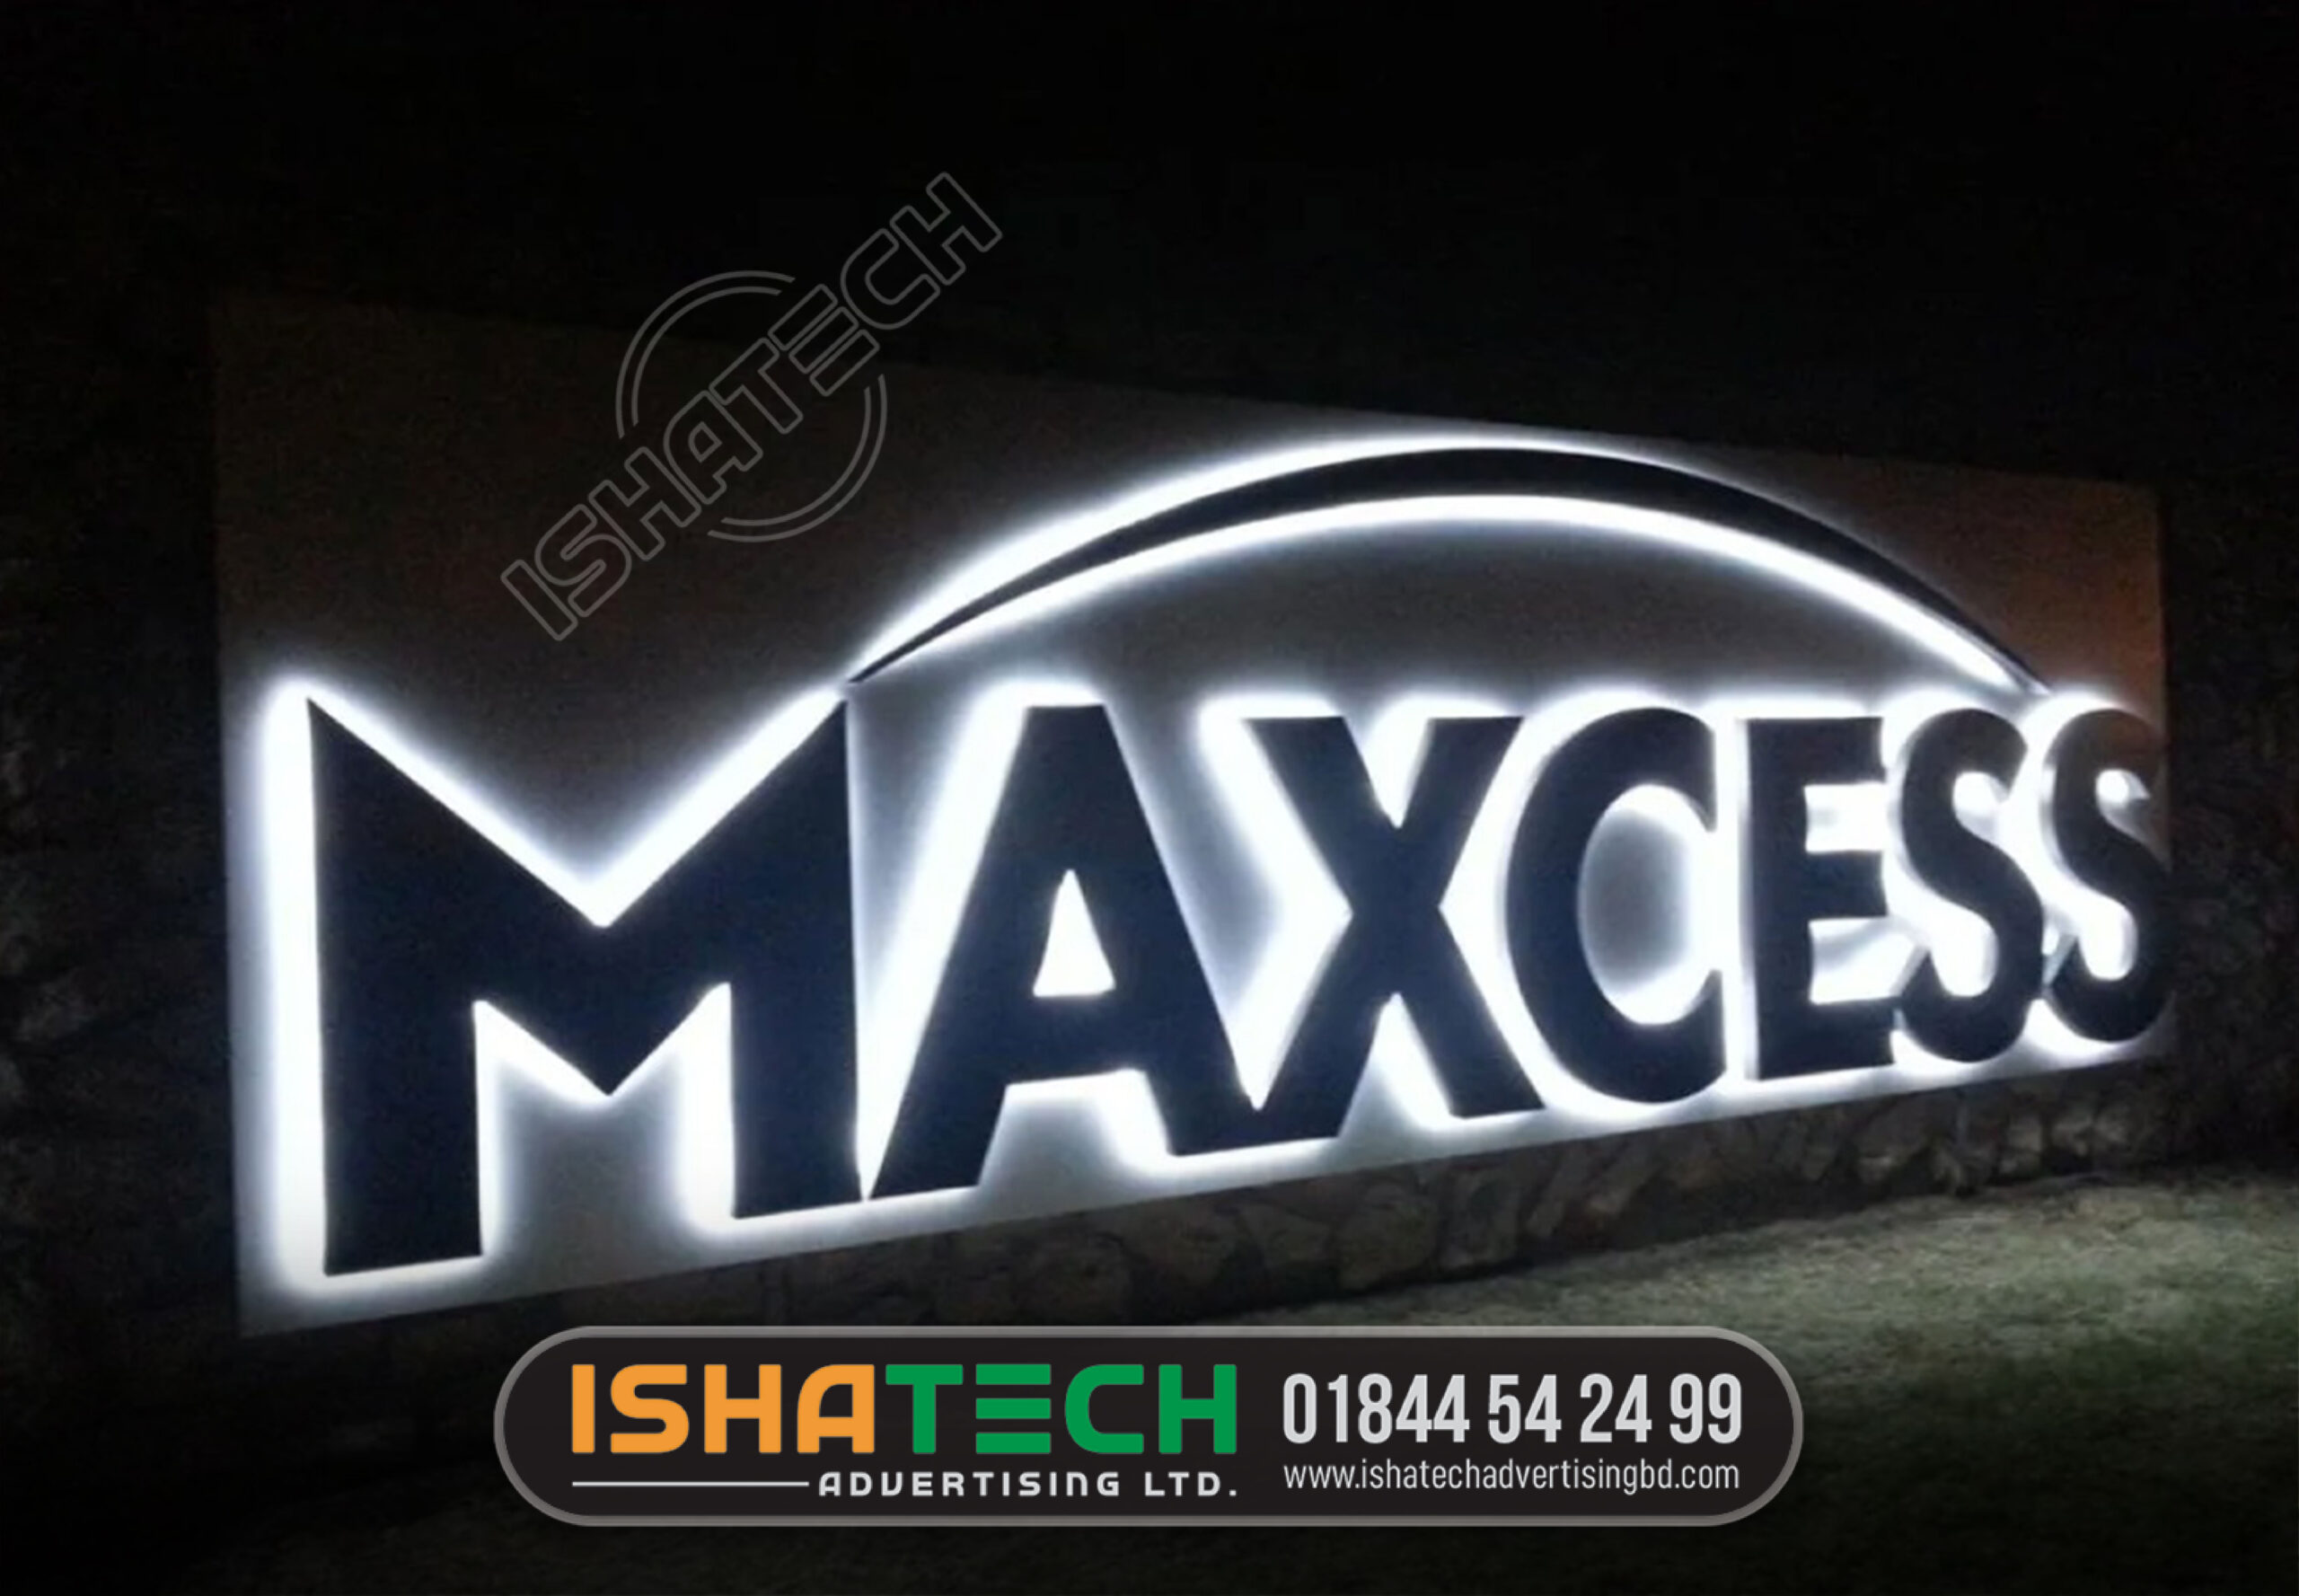 MAXCESS ACRYLIC BACKLIGHT LETTER SIGNAGE, Maxcess International Taps Electremedia for New Signage, Acrylic Backlit Letter Signage, LED Acrylic Letter Sign Wholesale Manufacturer.